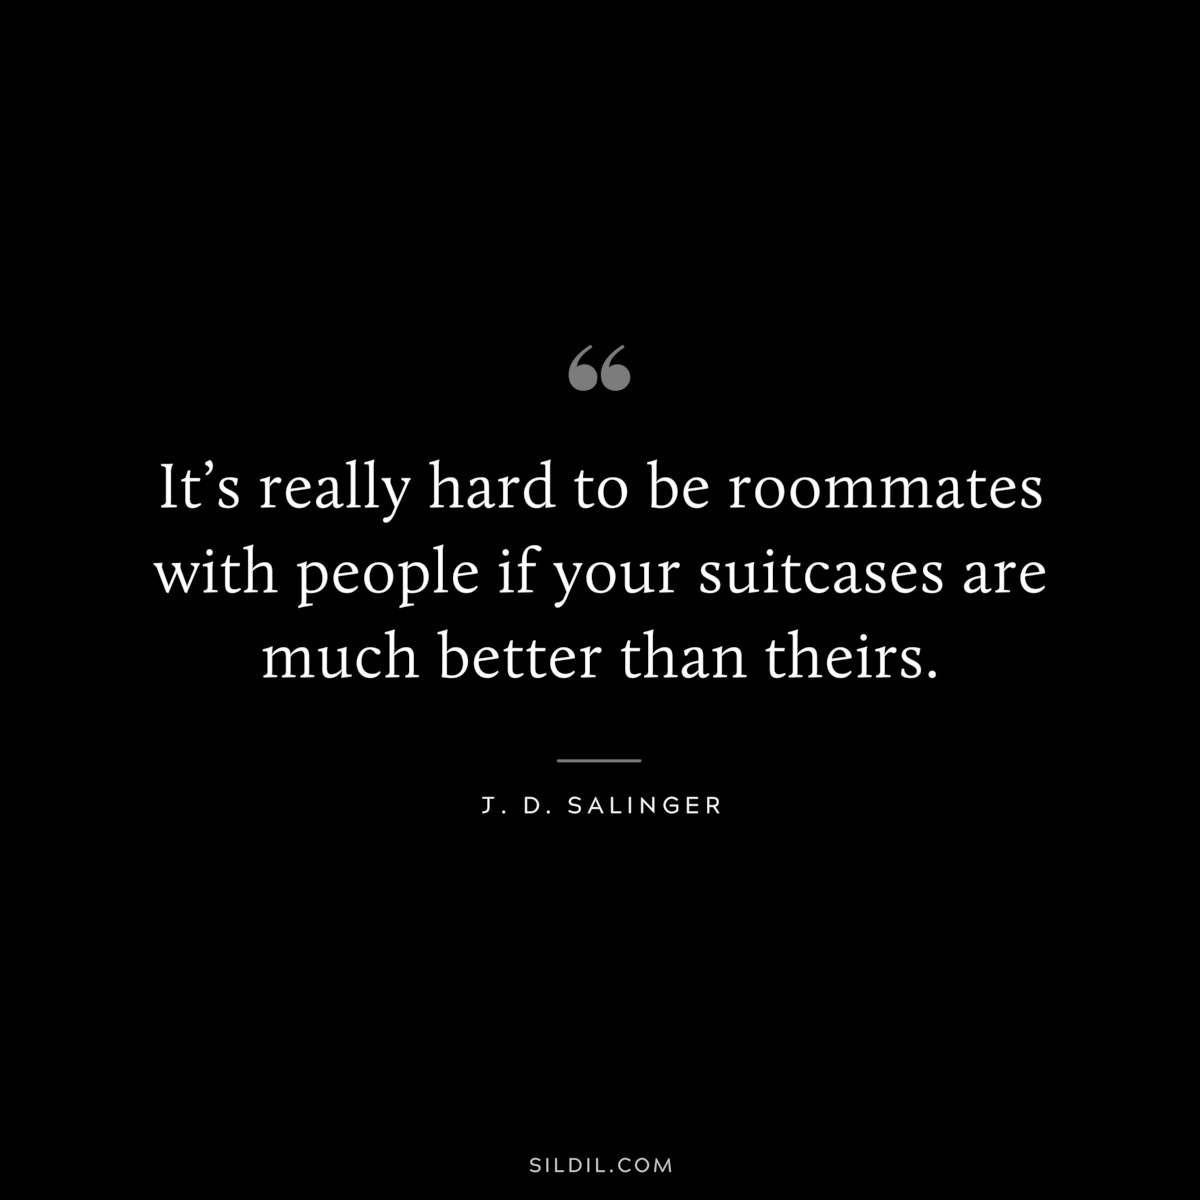 It’s really hard to be roommates with people if your suitcases are much better than theirs. — J. D. Salinger